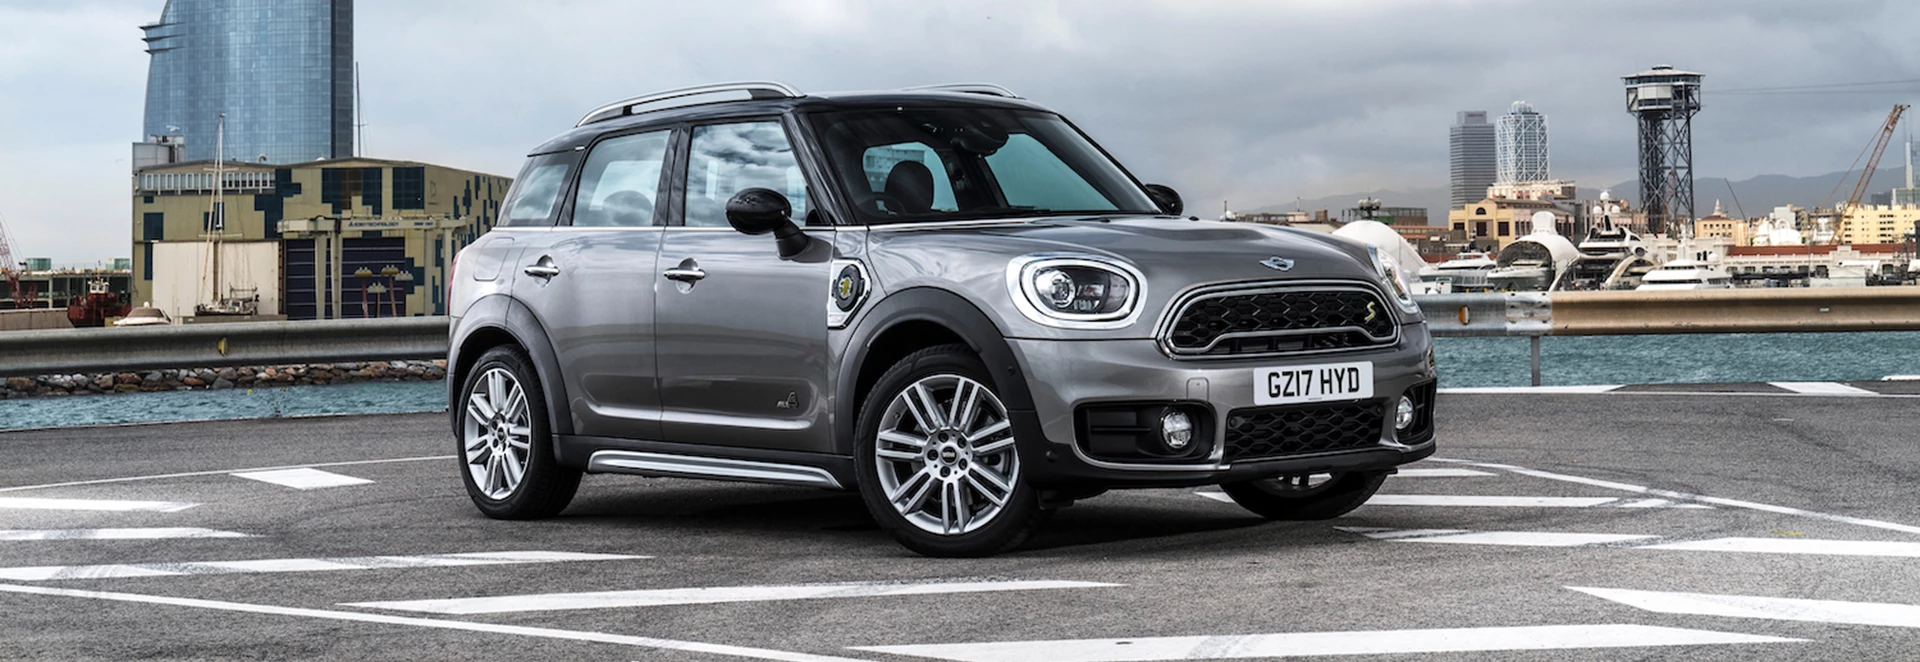 Buyer’s Guide to MINI's electric and hybrid range